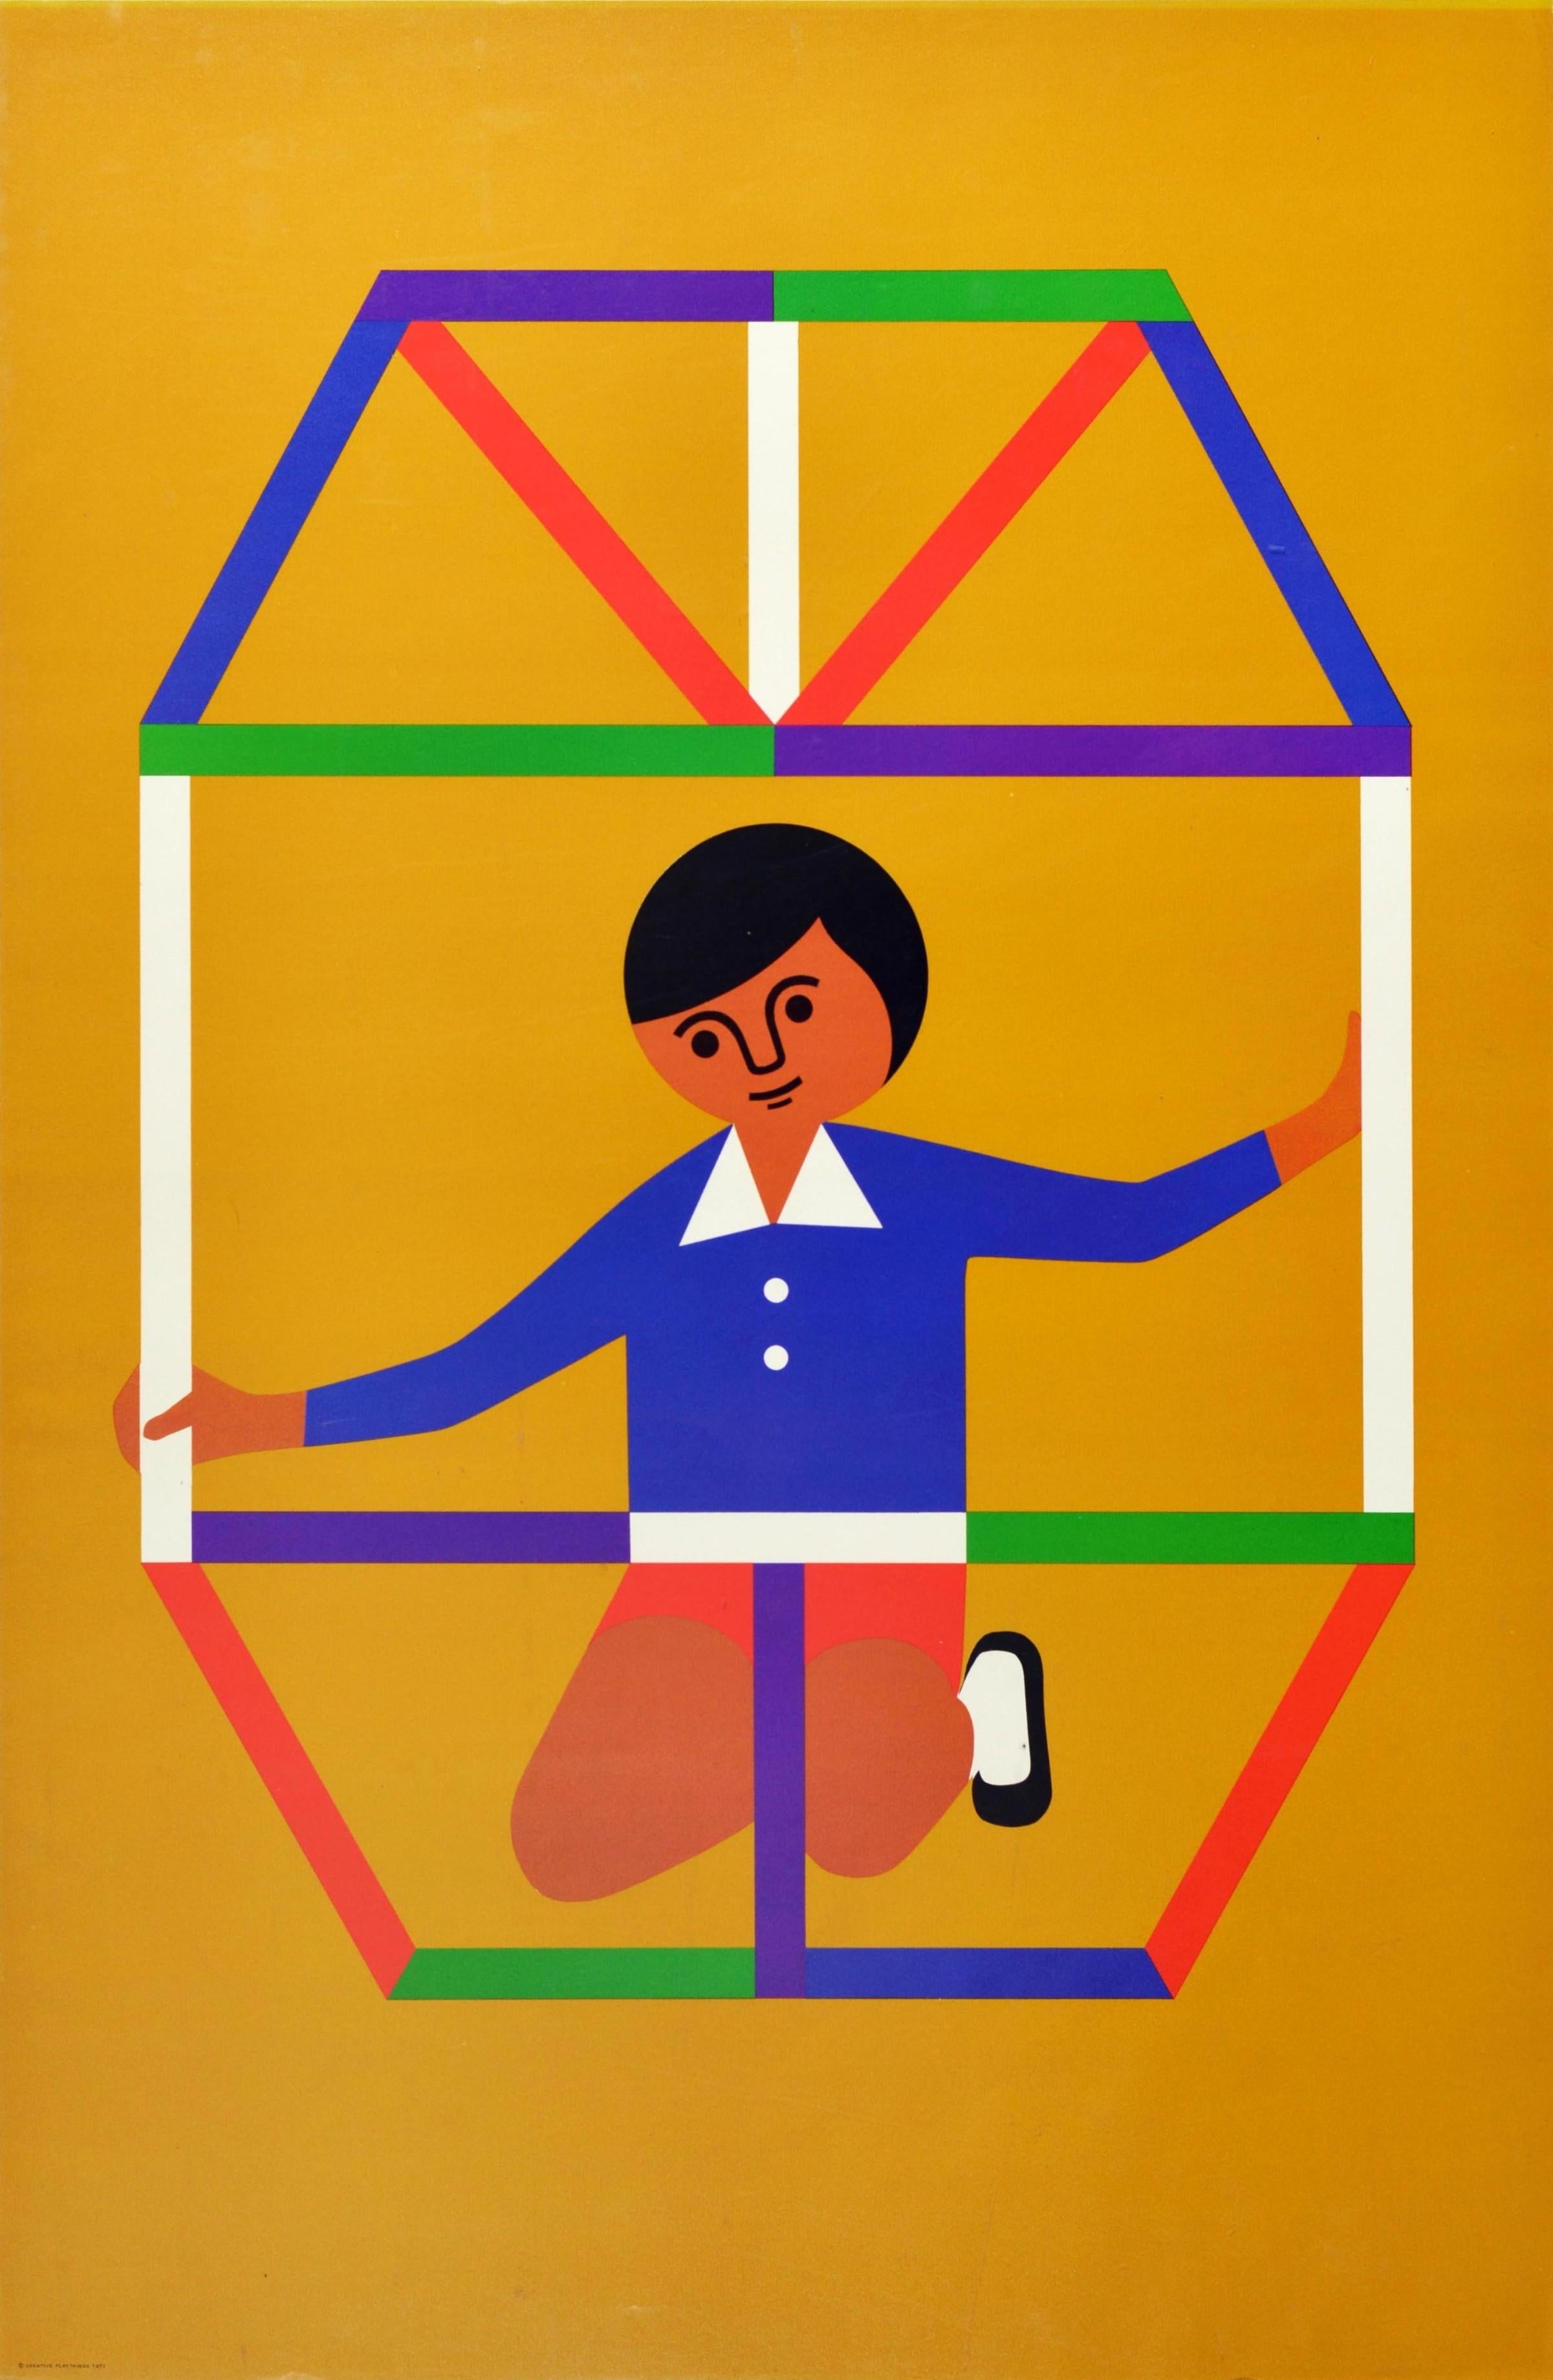 Original vintage advertising poster for the creative playthings educational toy shop in Manhattan New York featuring a fun and colourful graphic design by the South African toymaker and illustrator Fredun Shapur (b. 1929), showing a child in a blue